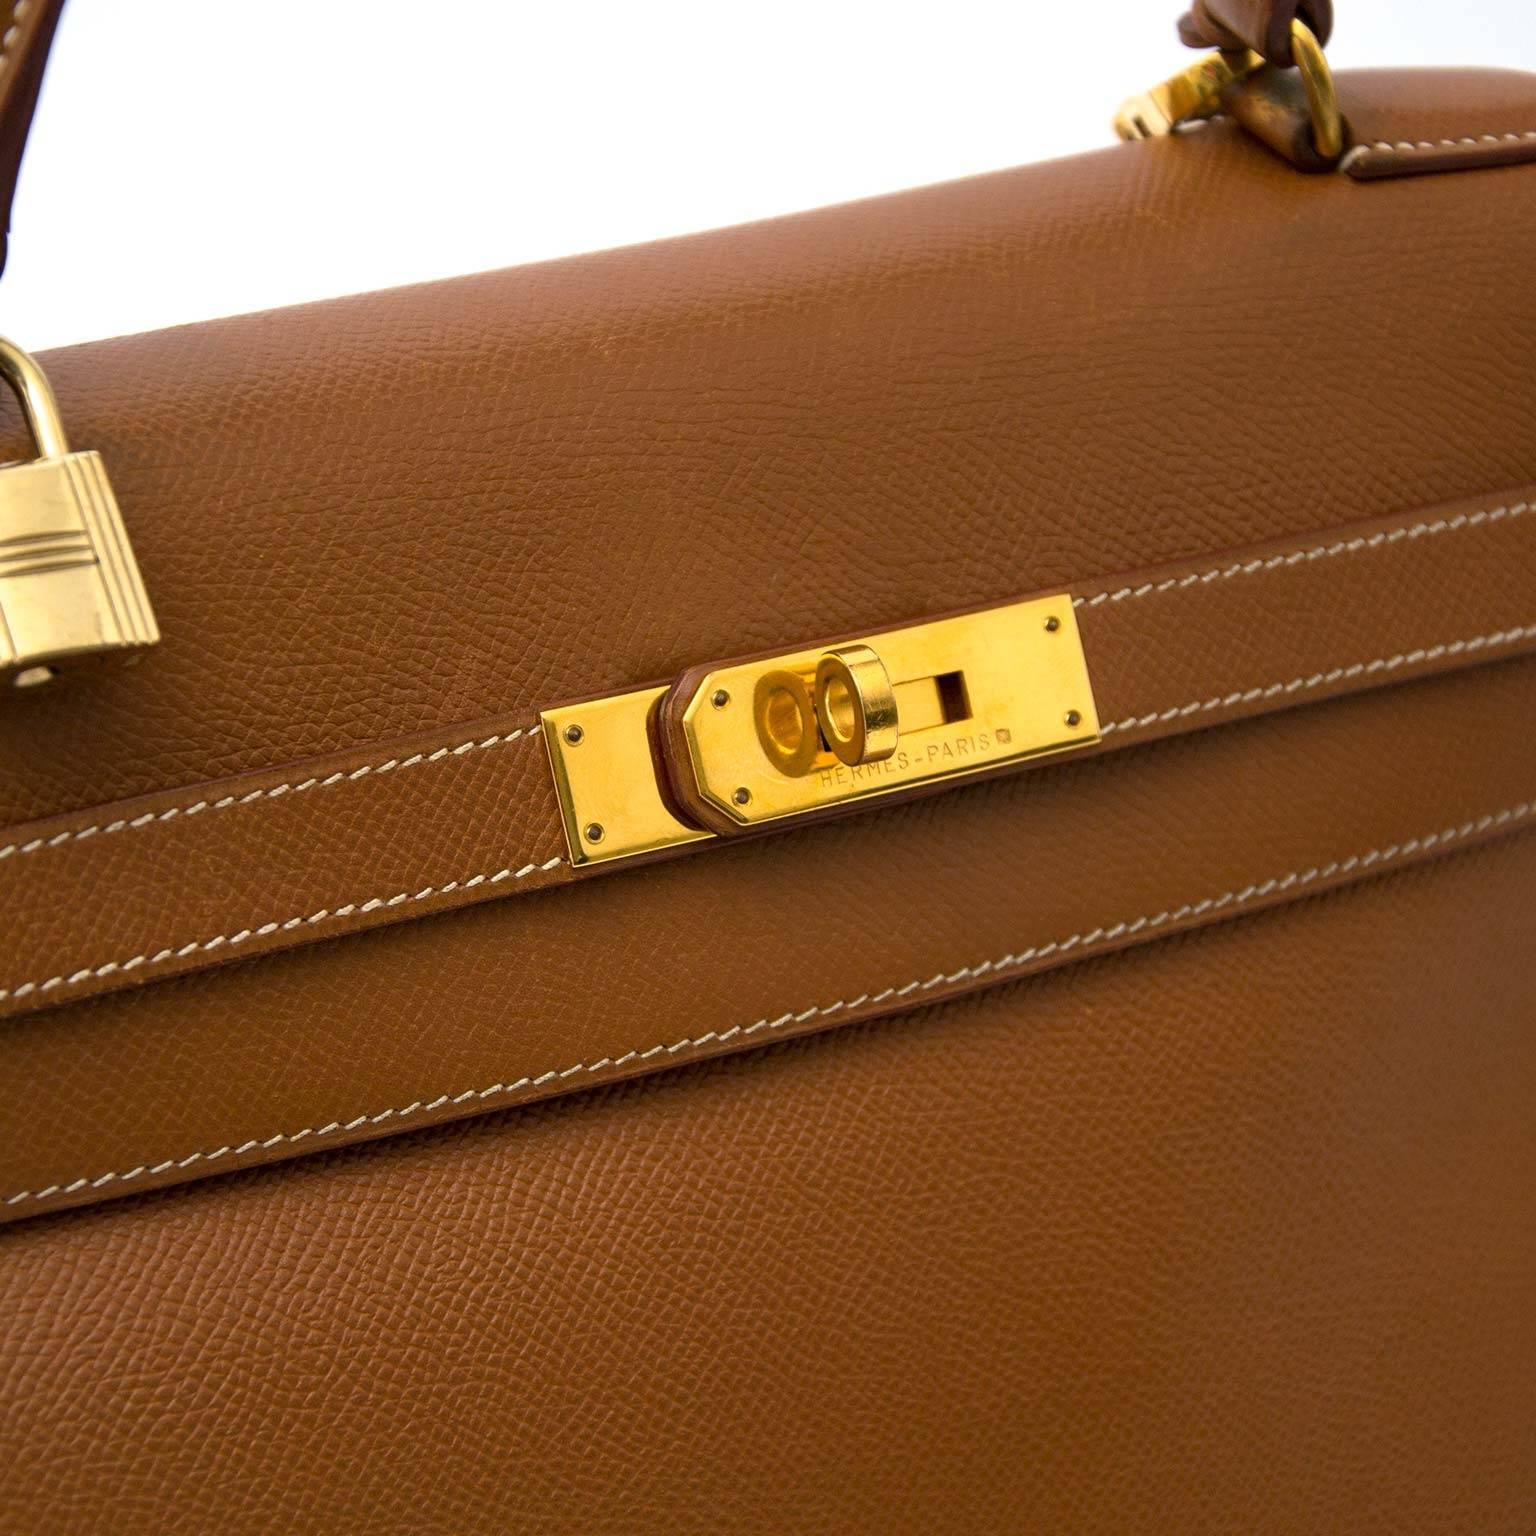 Good Preloved Condition

Hermès Kelly 35 Courchevel Gold GHW

This beautiful Hermès Kelly bag is made out of Courchevel leather which is an embossed leather that is slightly shiny. The top part of the grain is darker. It's  lightweigted, scratch